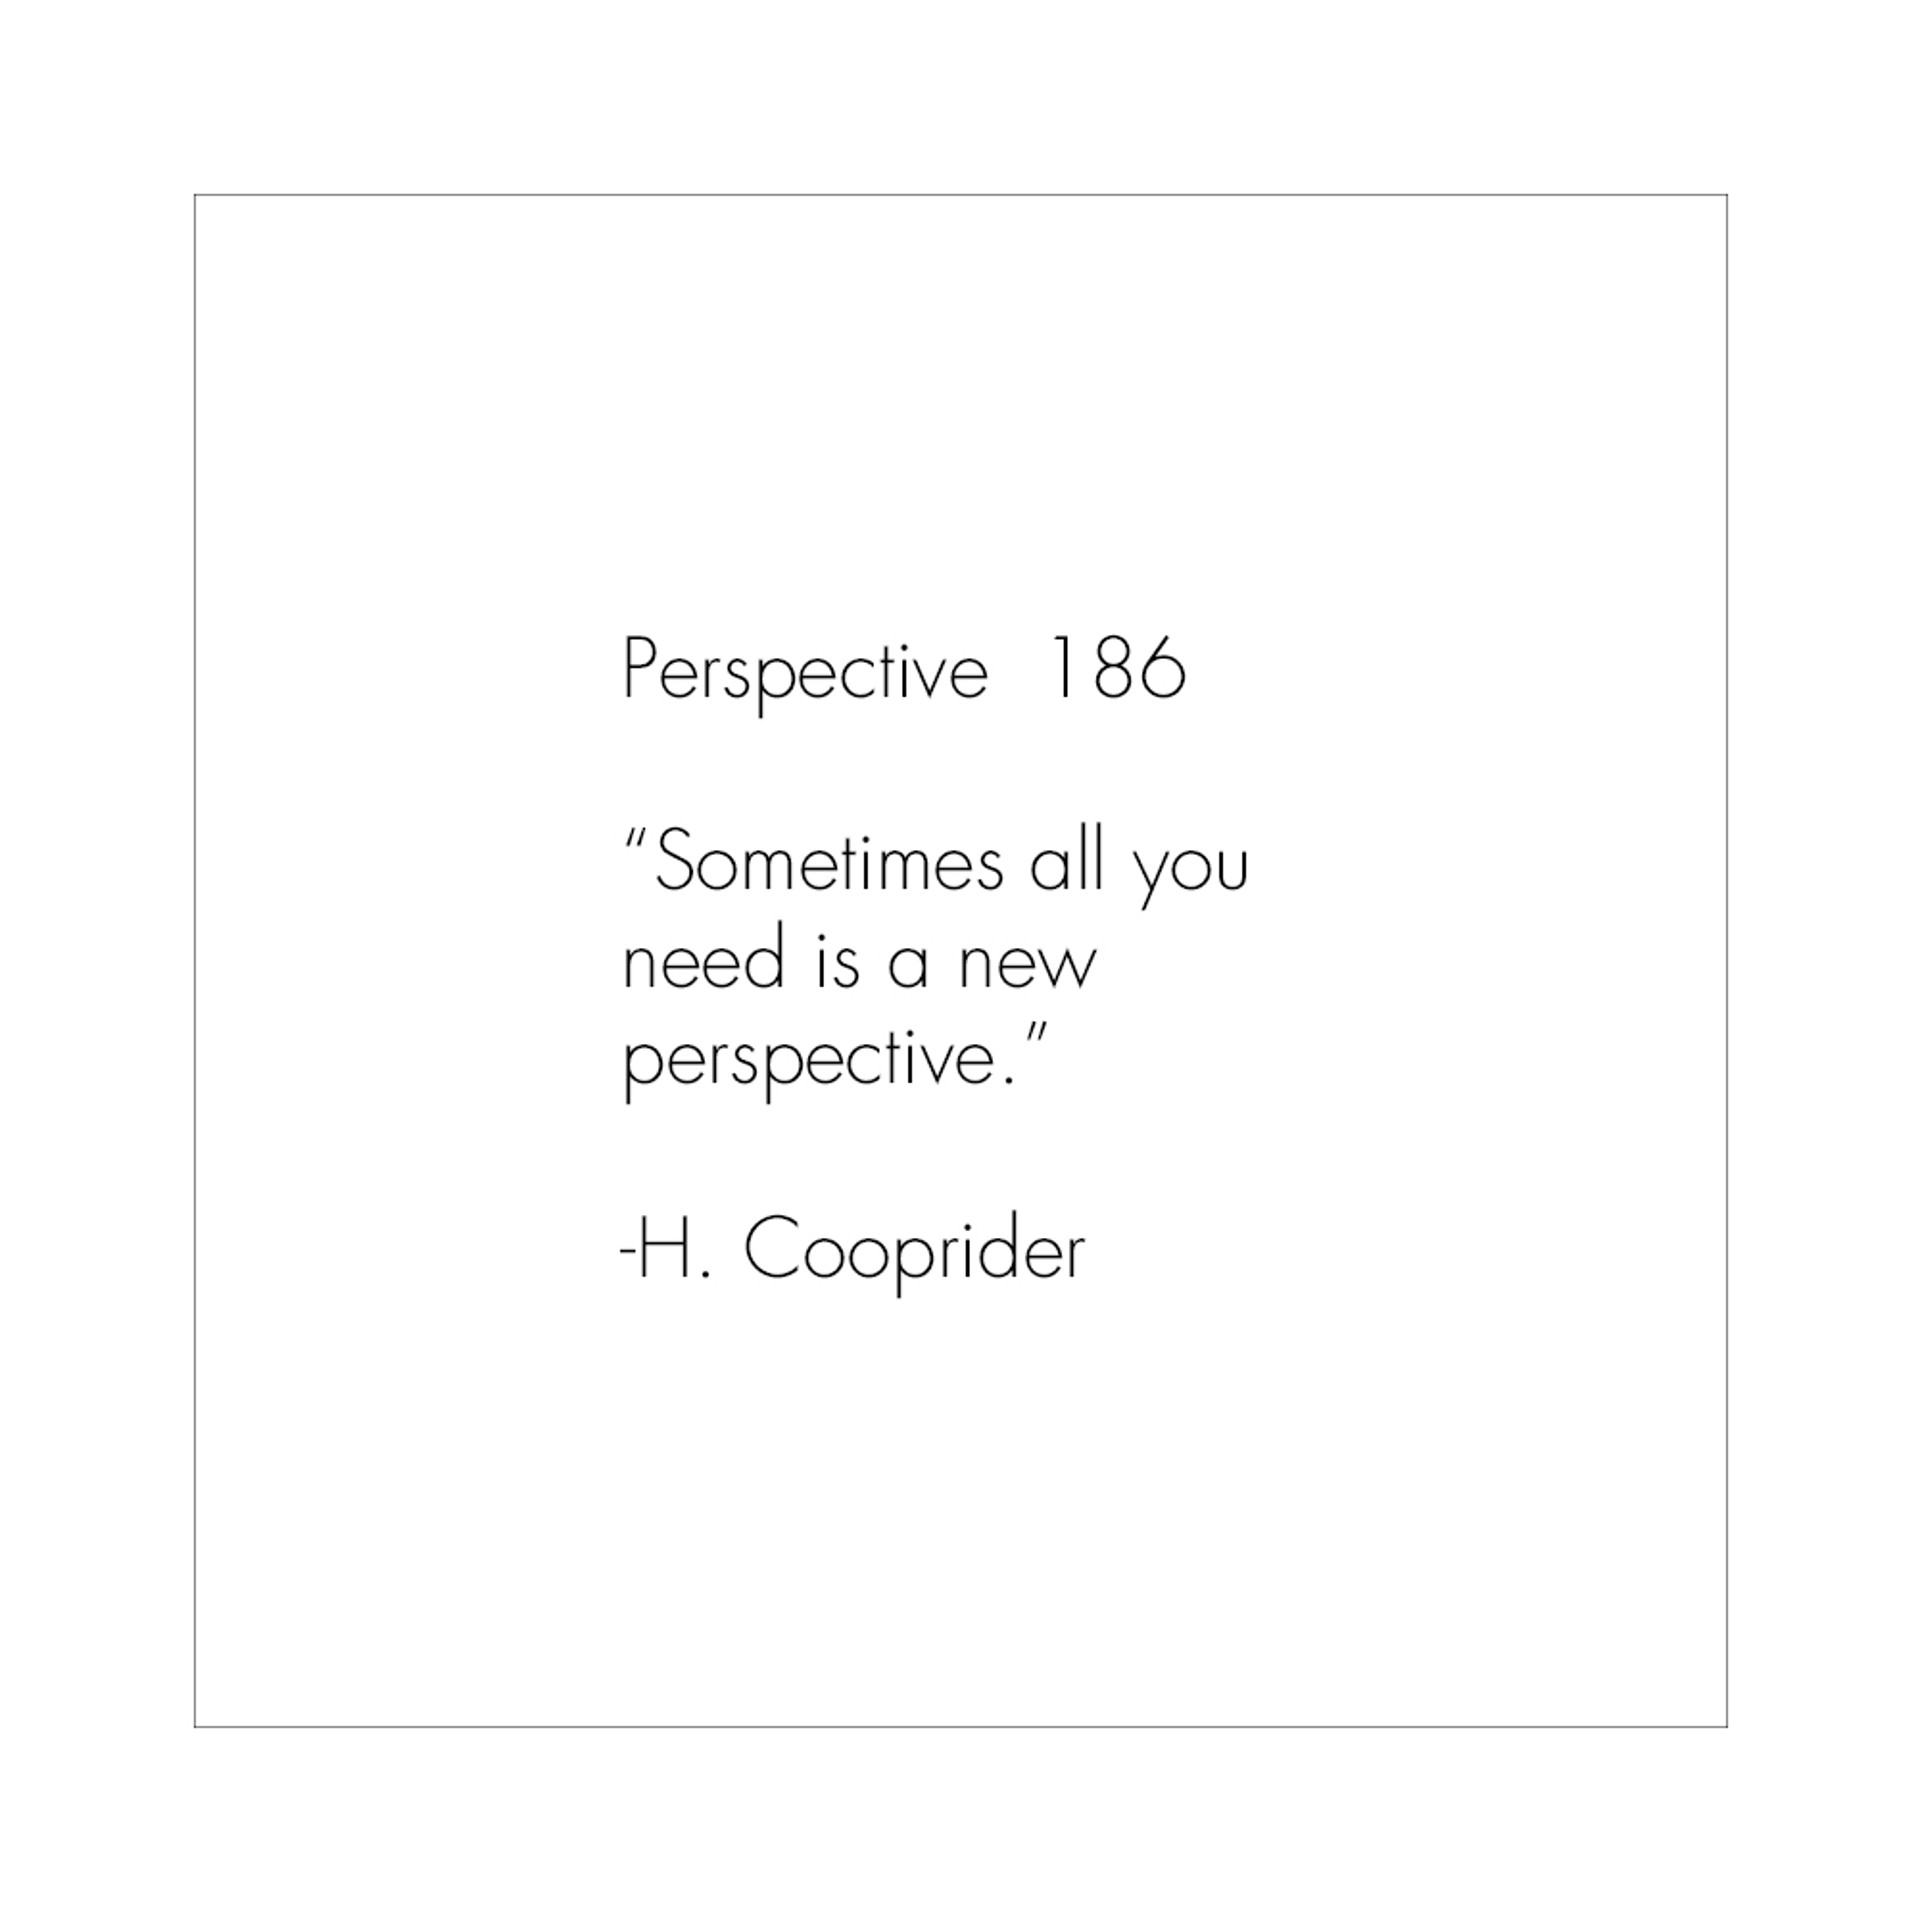 Perspective #186 by Houston Llew